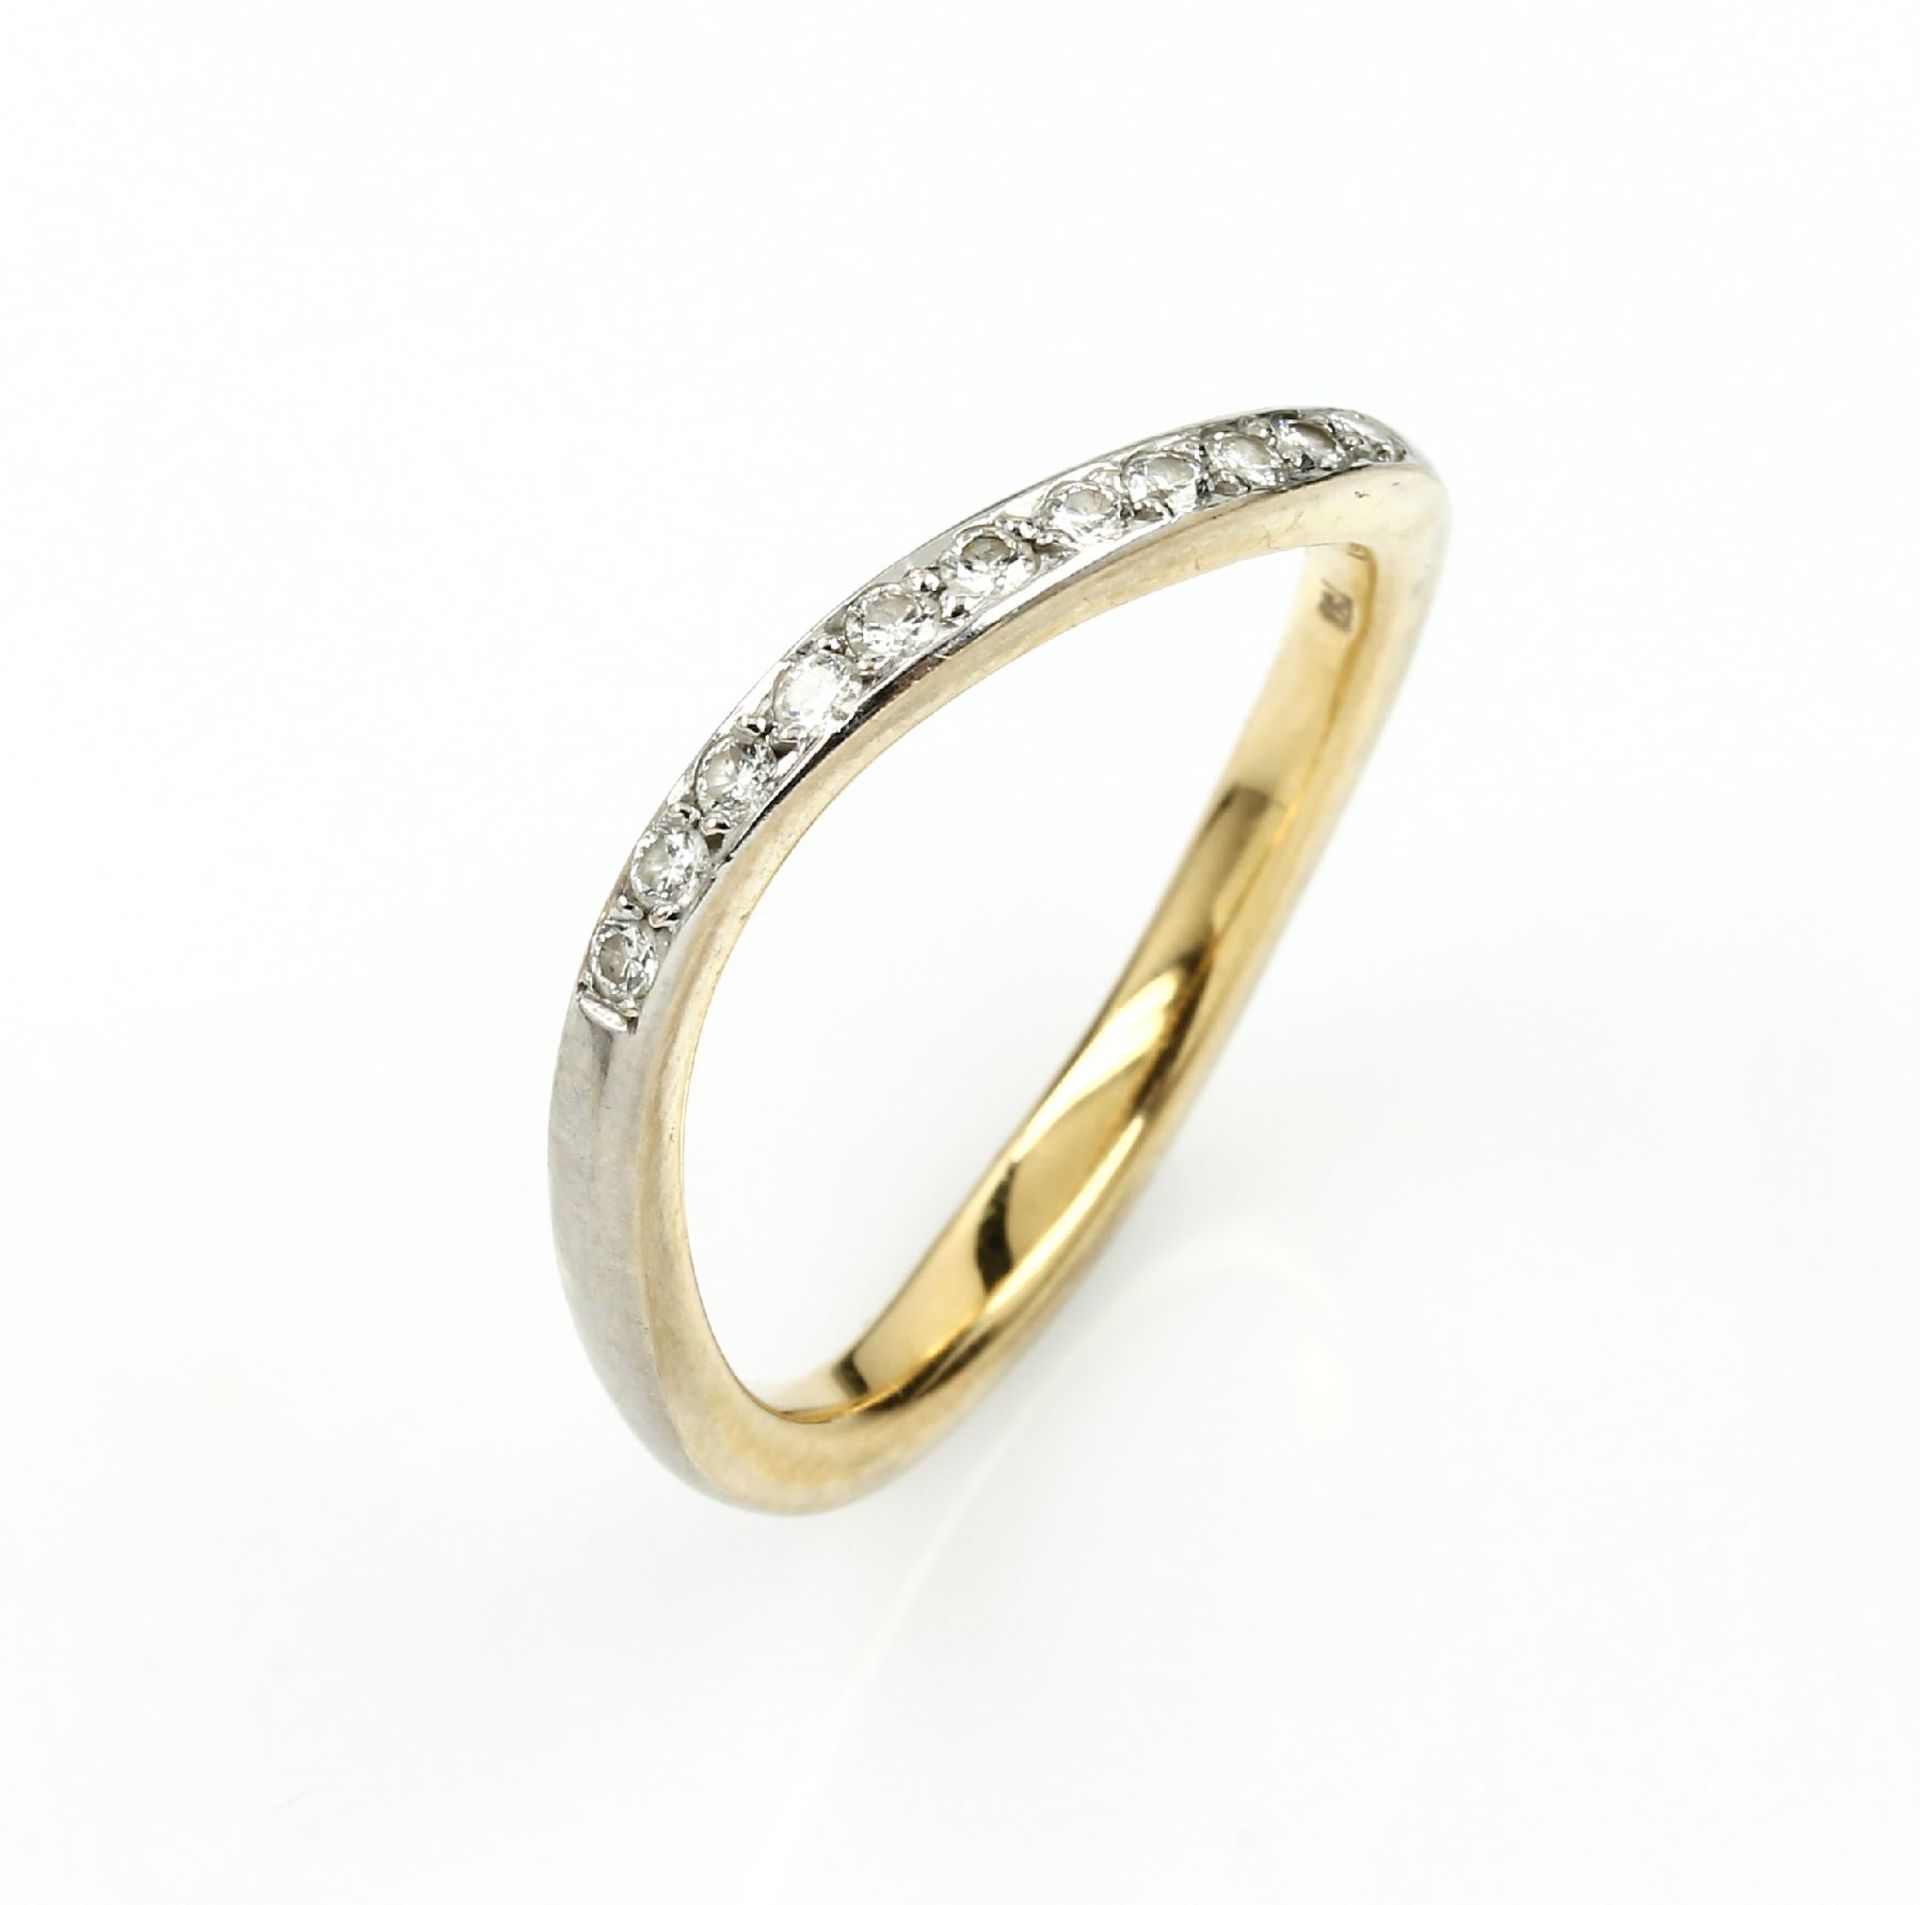 18 kt gold ring with brilliants , YG/WG 750/000, 11 brilliants total approx. 0.22 ct Wesselton/si,